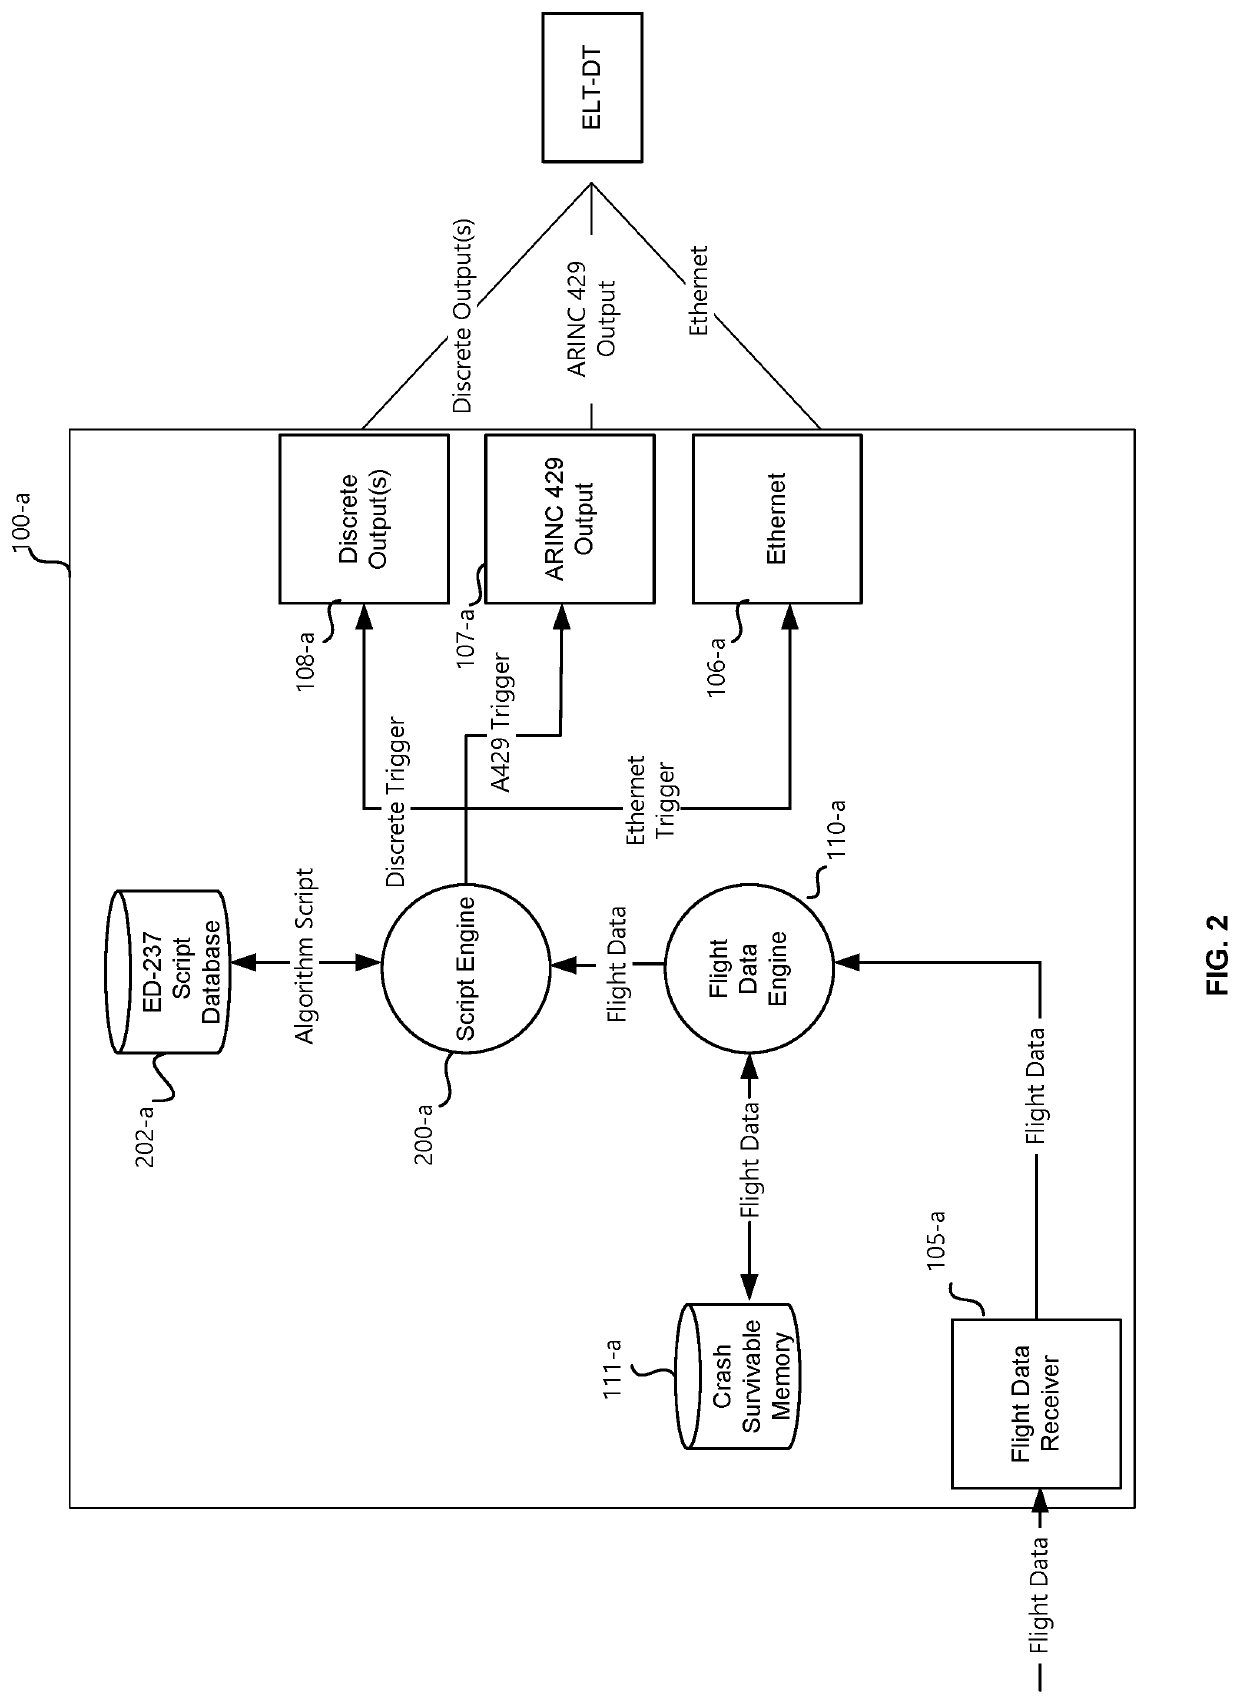 Systems and methods for using flight data recorder data